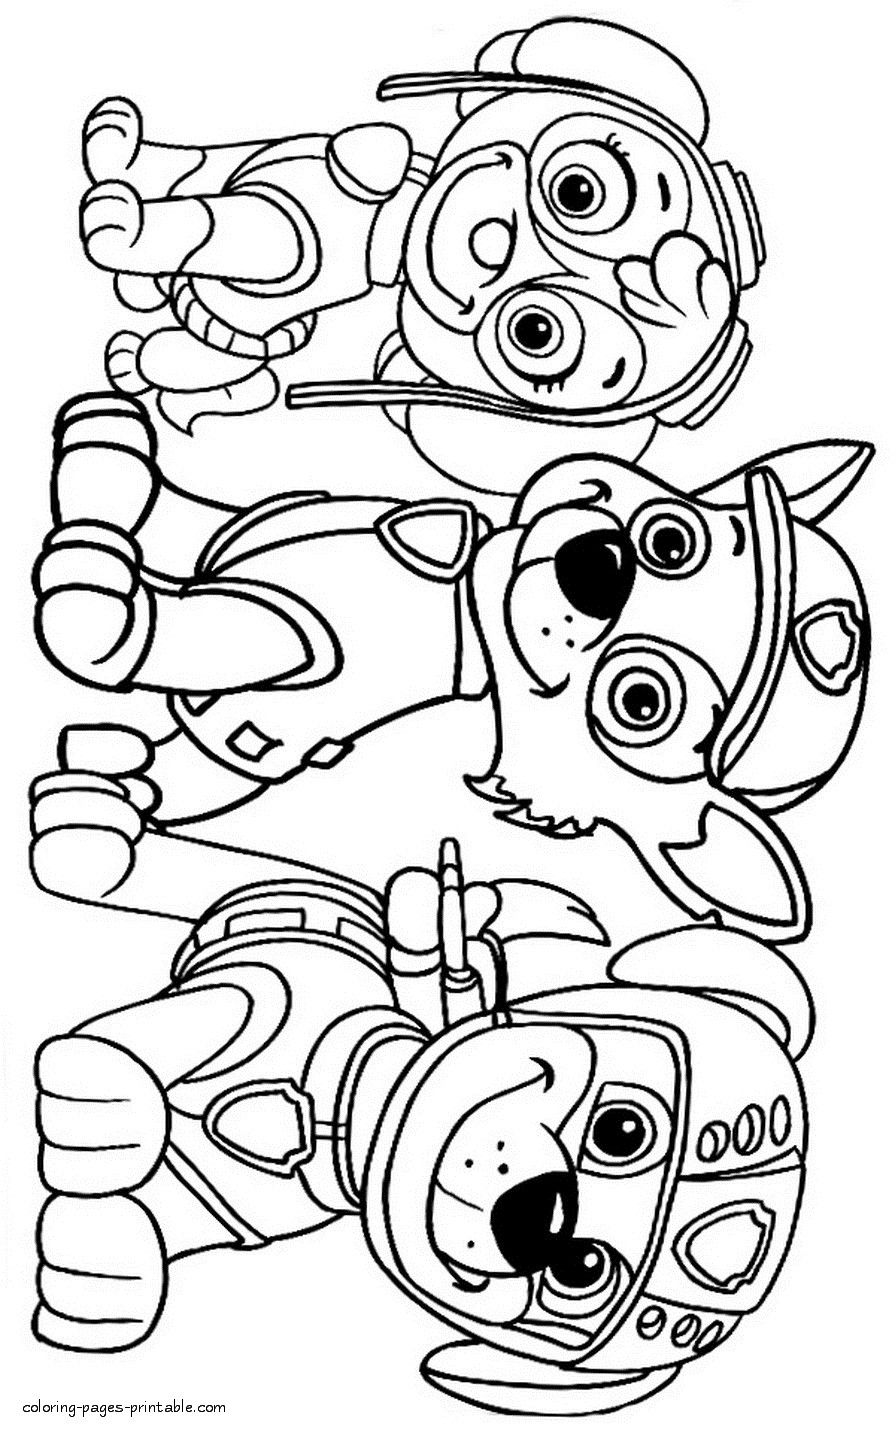 Coloring Pages For Kids Paw Patrol
 Paw Patrol Color Pages